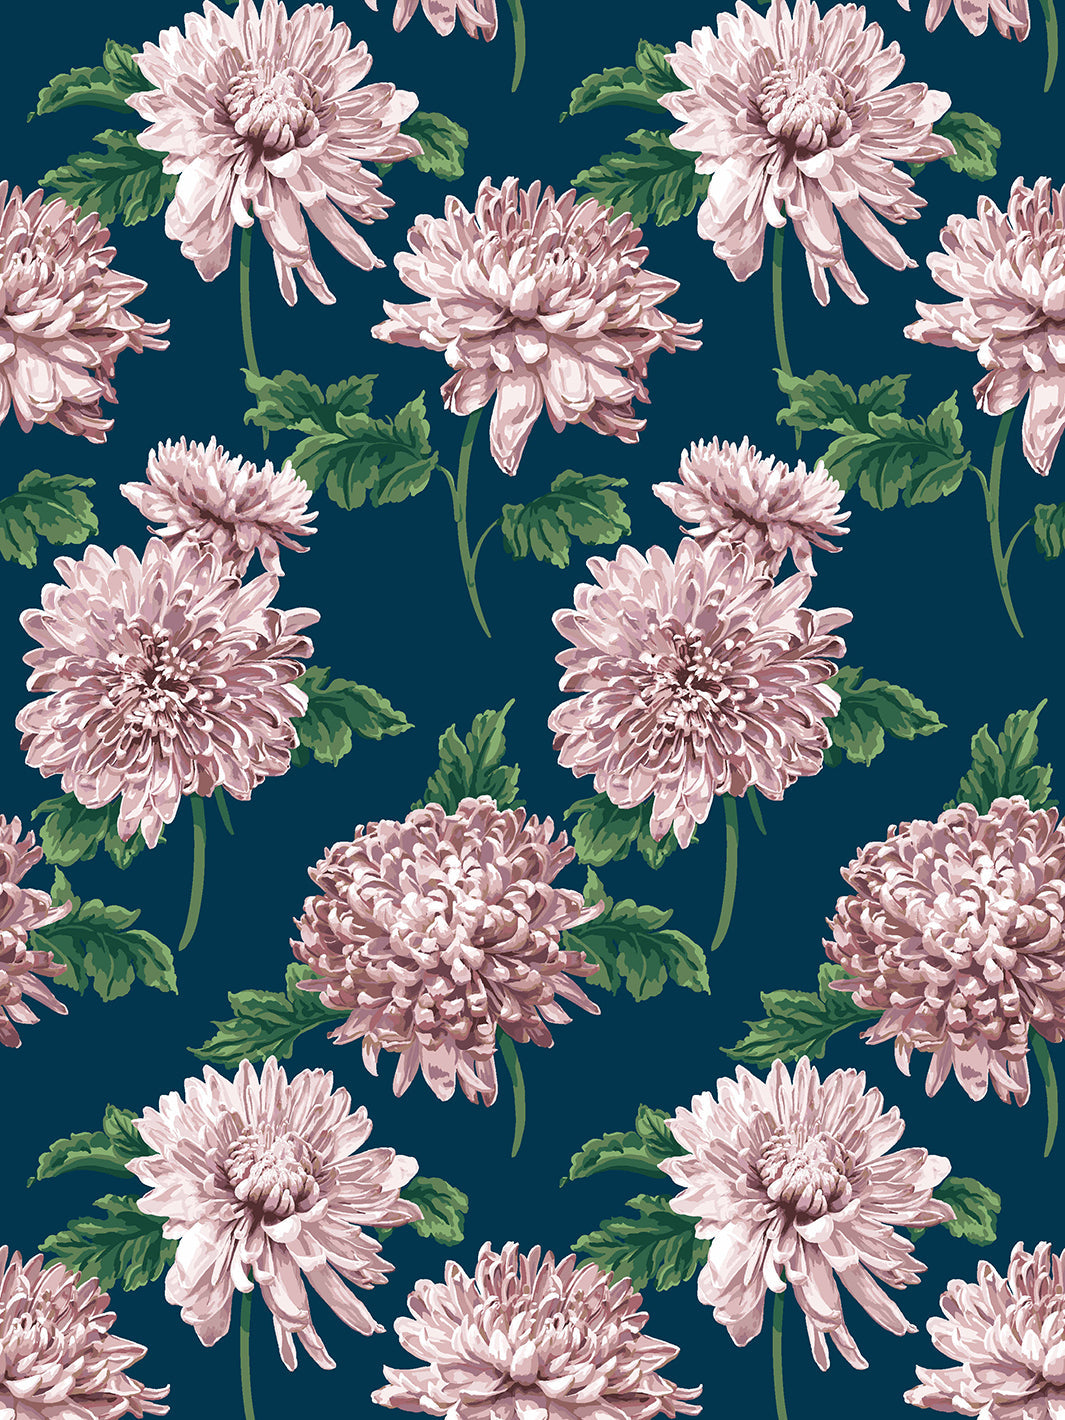 'Mums for Marion Small' Wallpaper by Sarah Jessica Parker - Navy